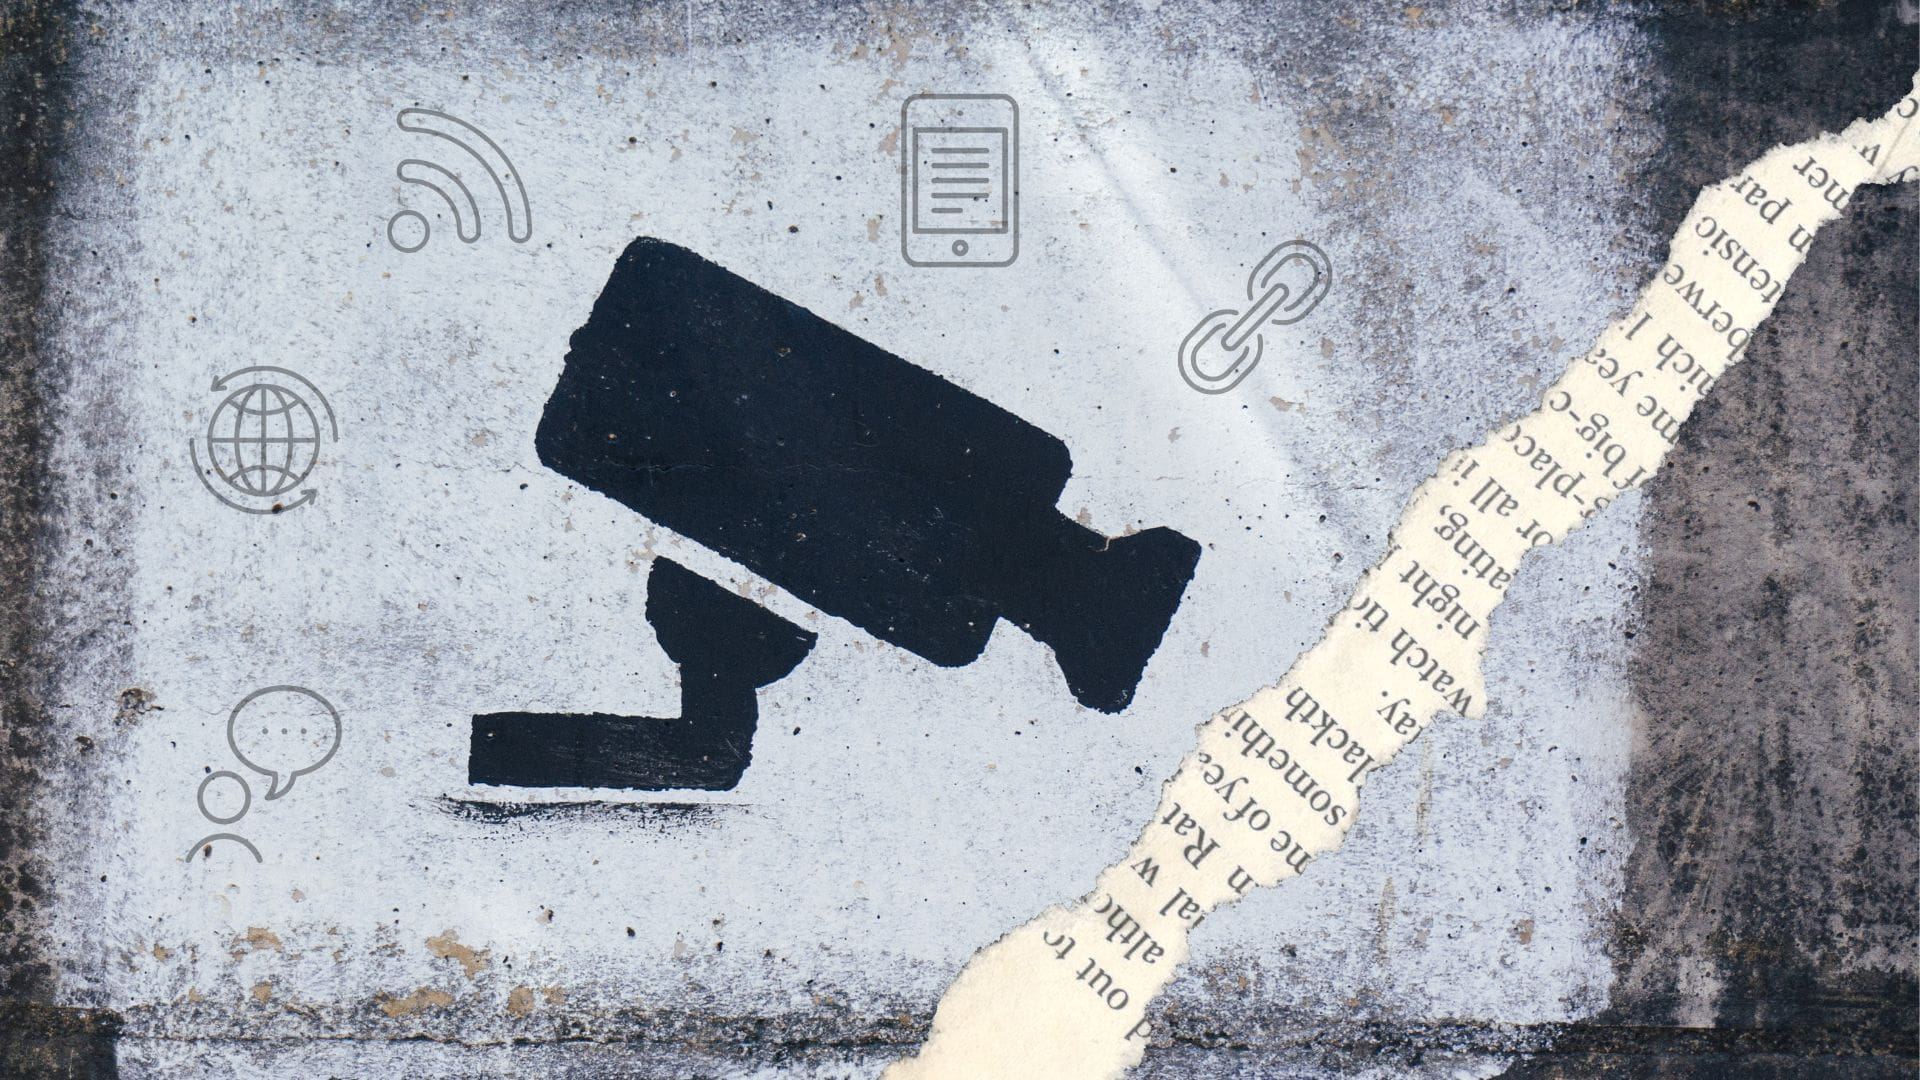 Spying in the digital age: The use of spyware against journalists